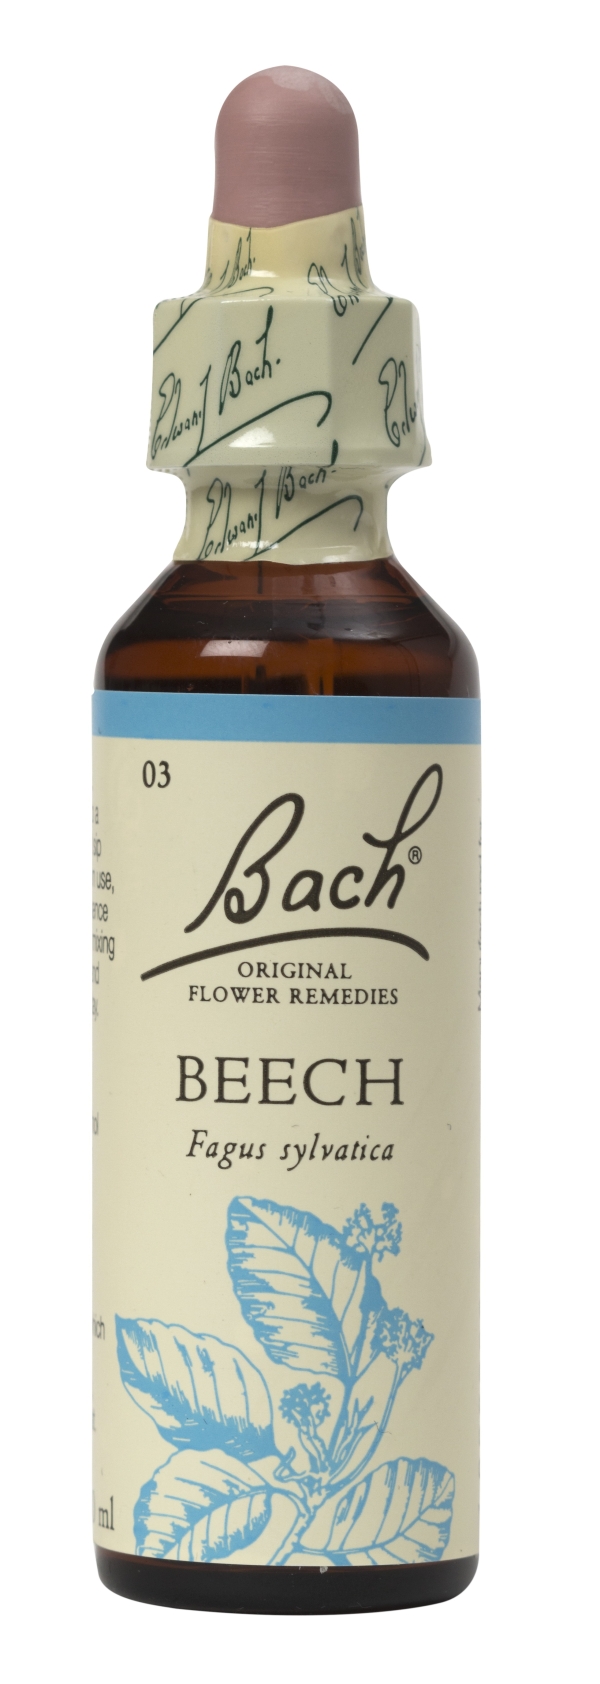 Nelson Bach Flower Remedies: Bach Beech Flower Remedy (20ml) available online here